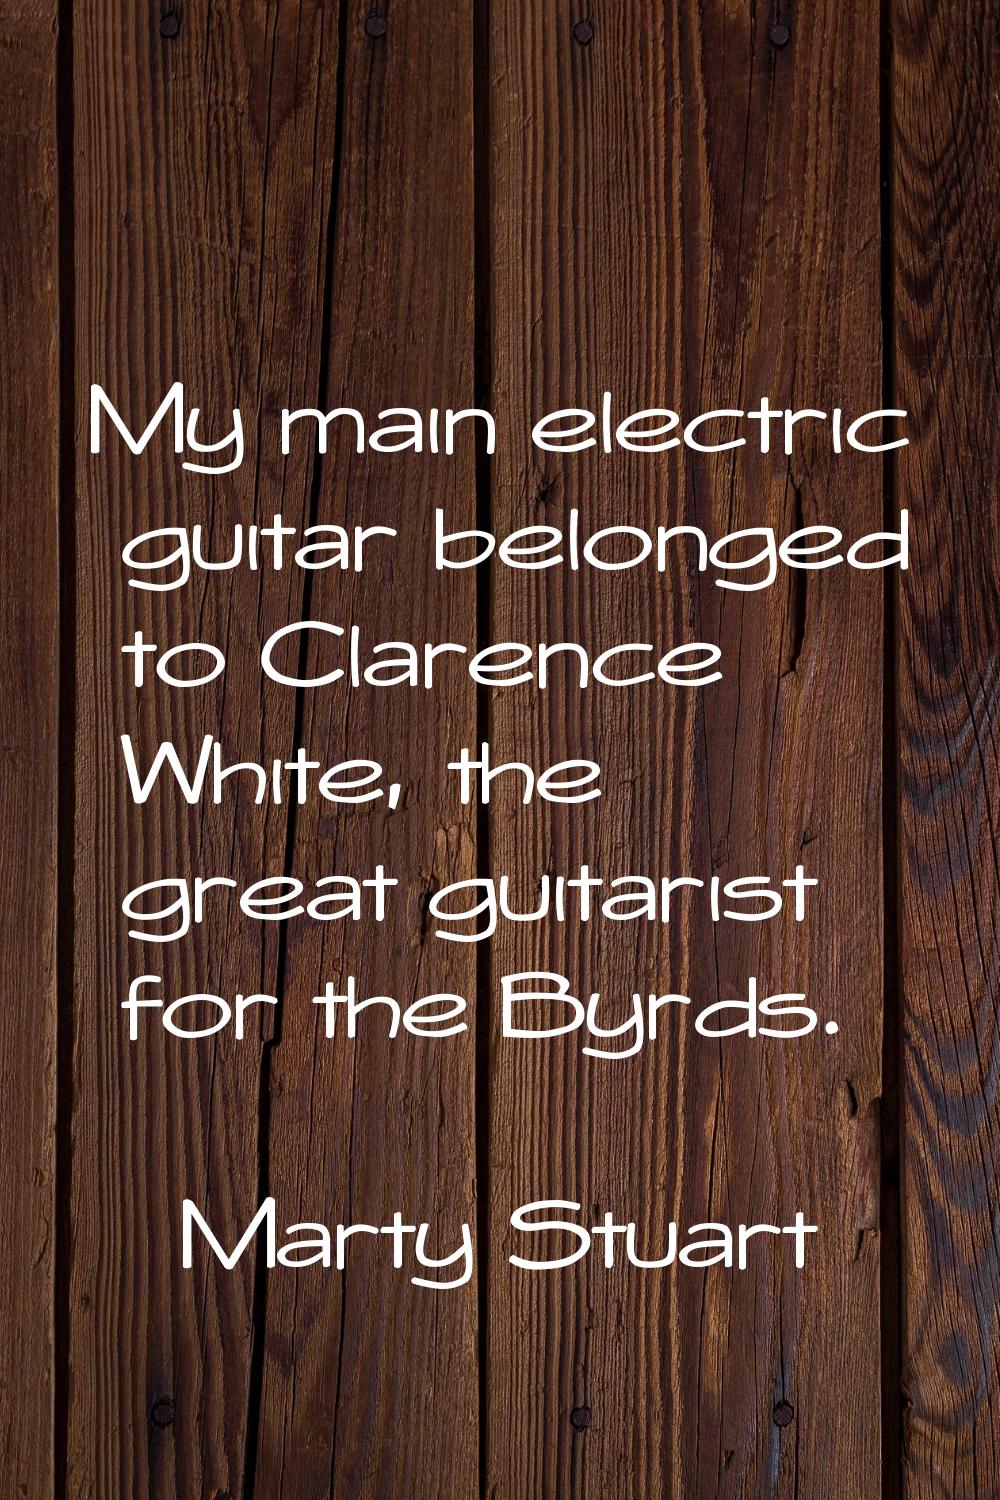 My main electric guitar belonged to Clarence White, the great guitarist for the Byrds.